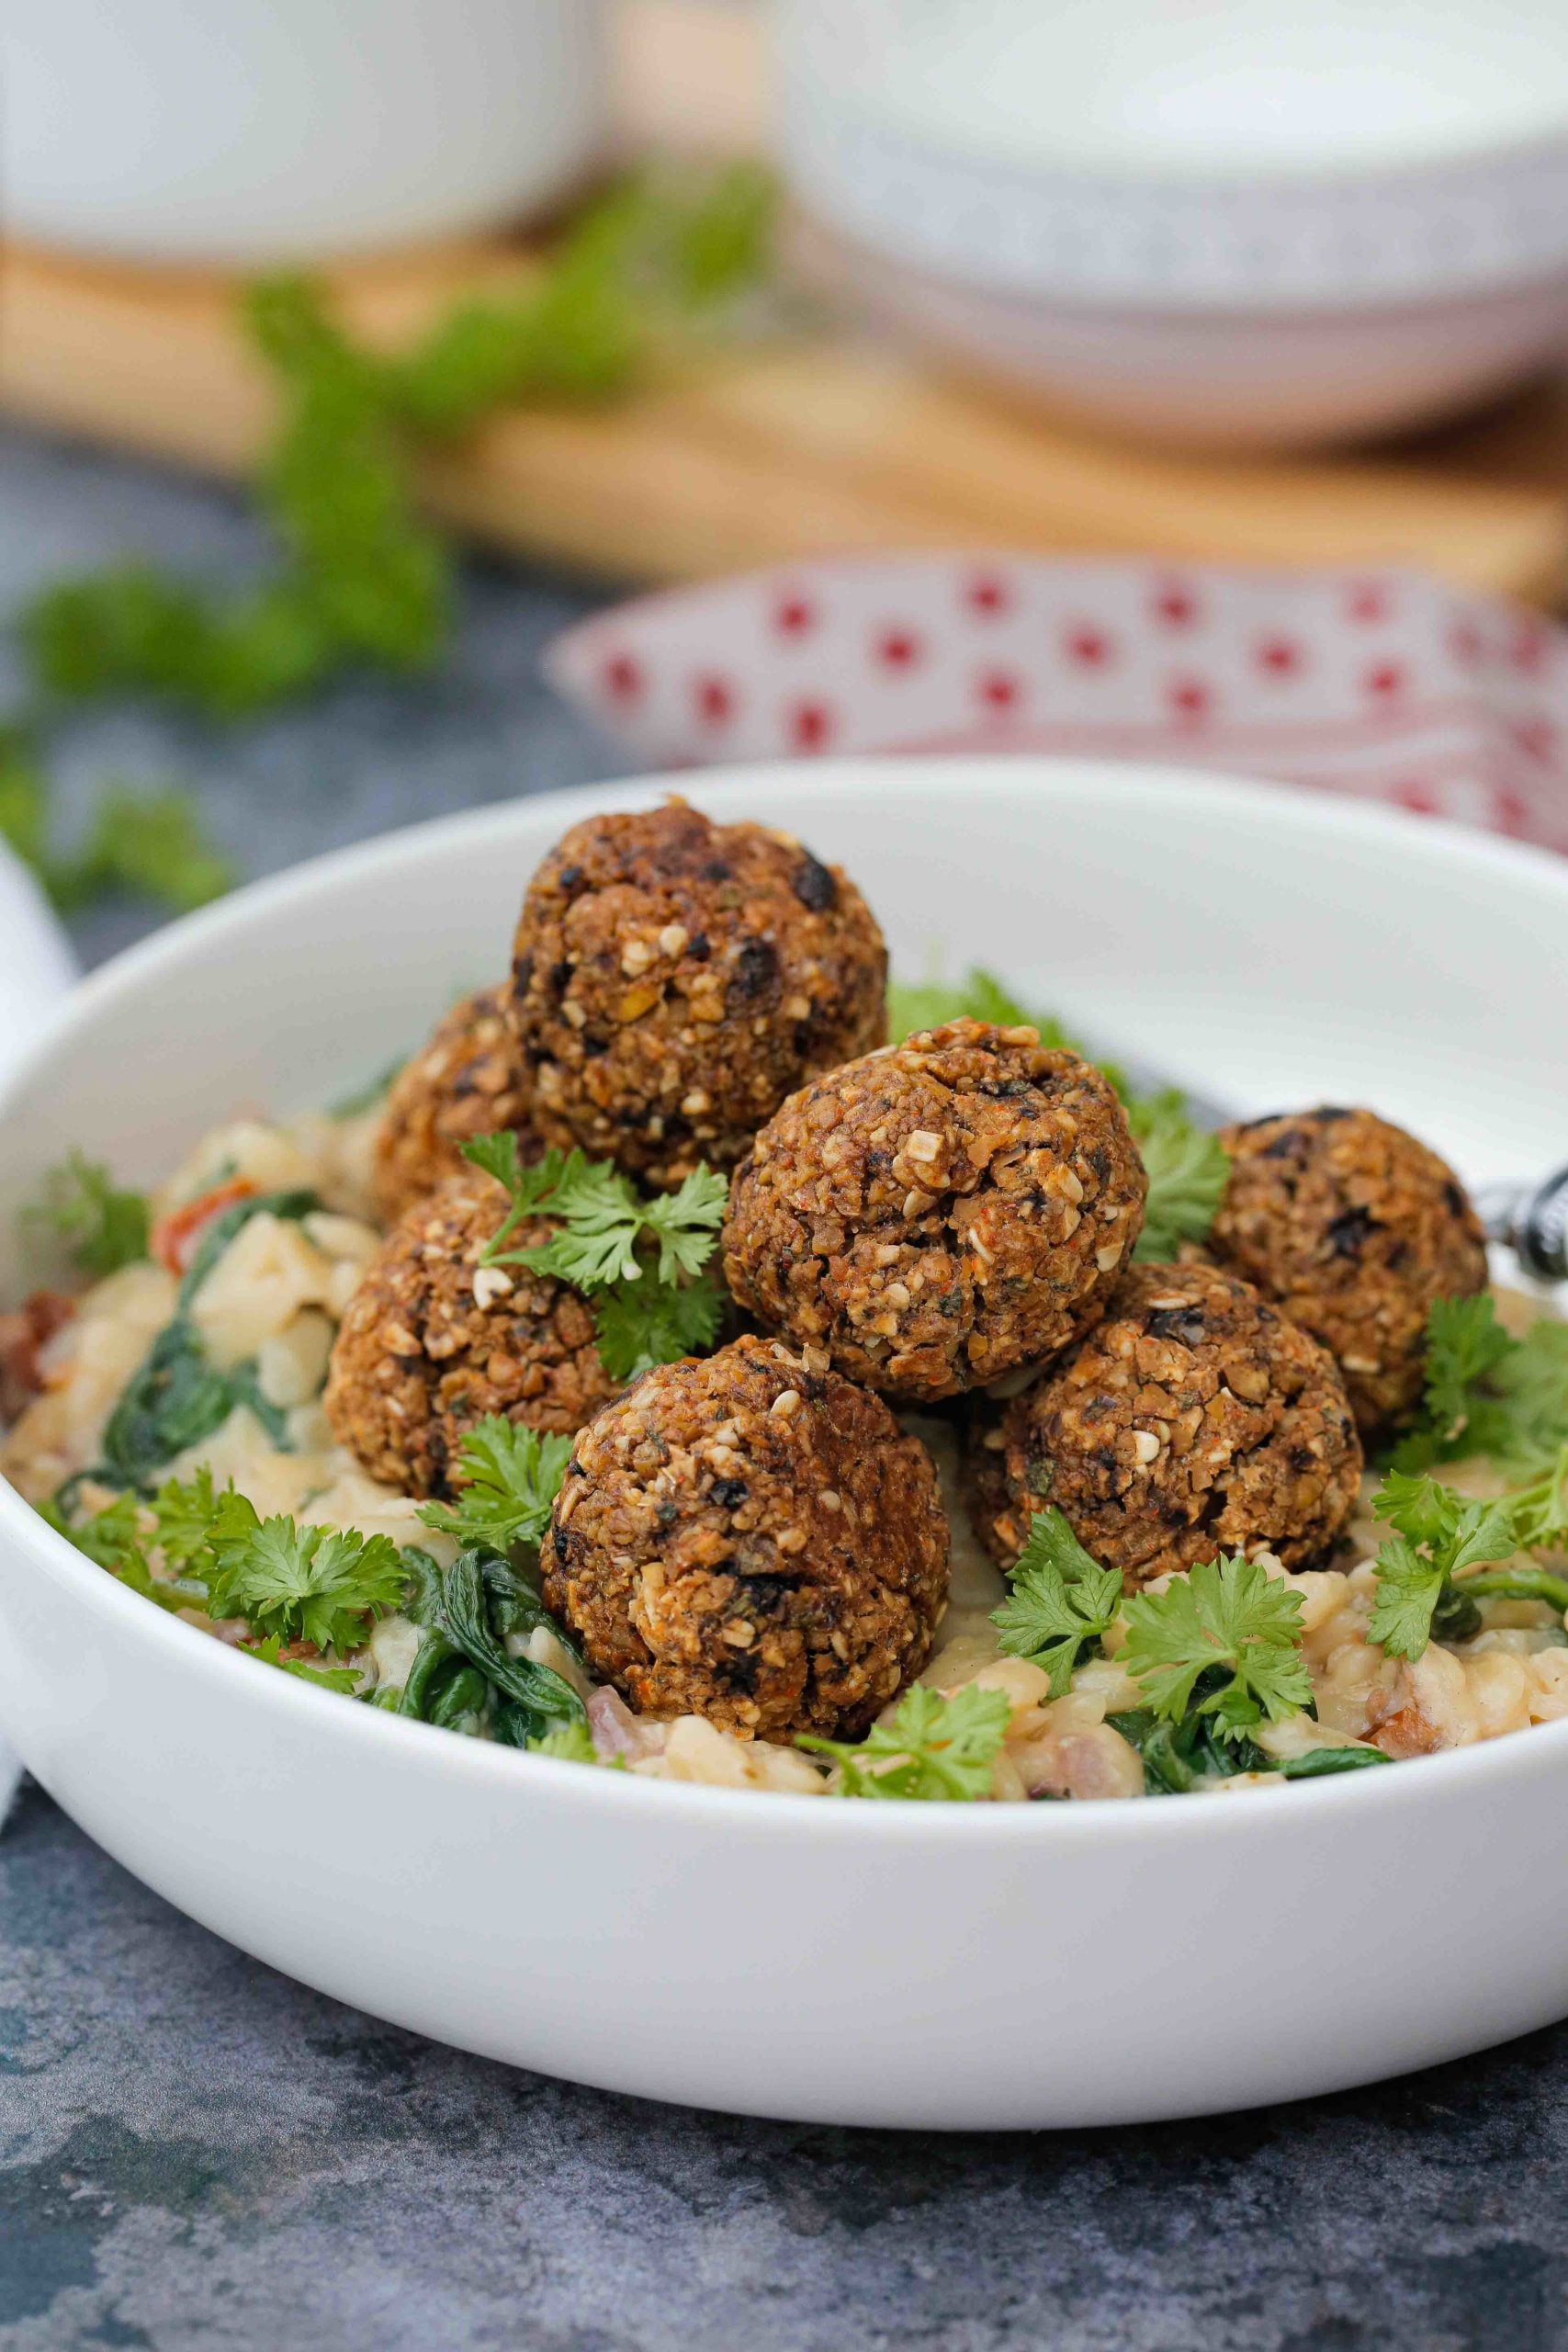 Crispy baked vegan meatballs with creamy orzo packed with spinach, sun dried tomatoes and lots of delicious flavour | Recipe on thecookandhim.com #veganmeatballs #veganpasta #vegandinner #veganmealidea #orzopasta #thecookandhim